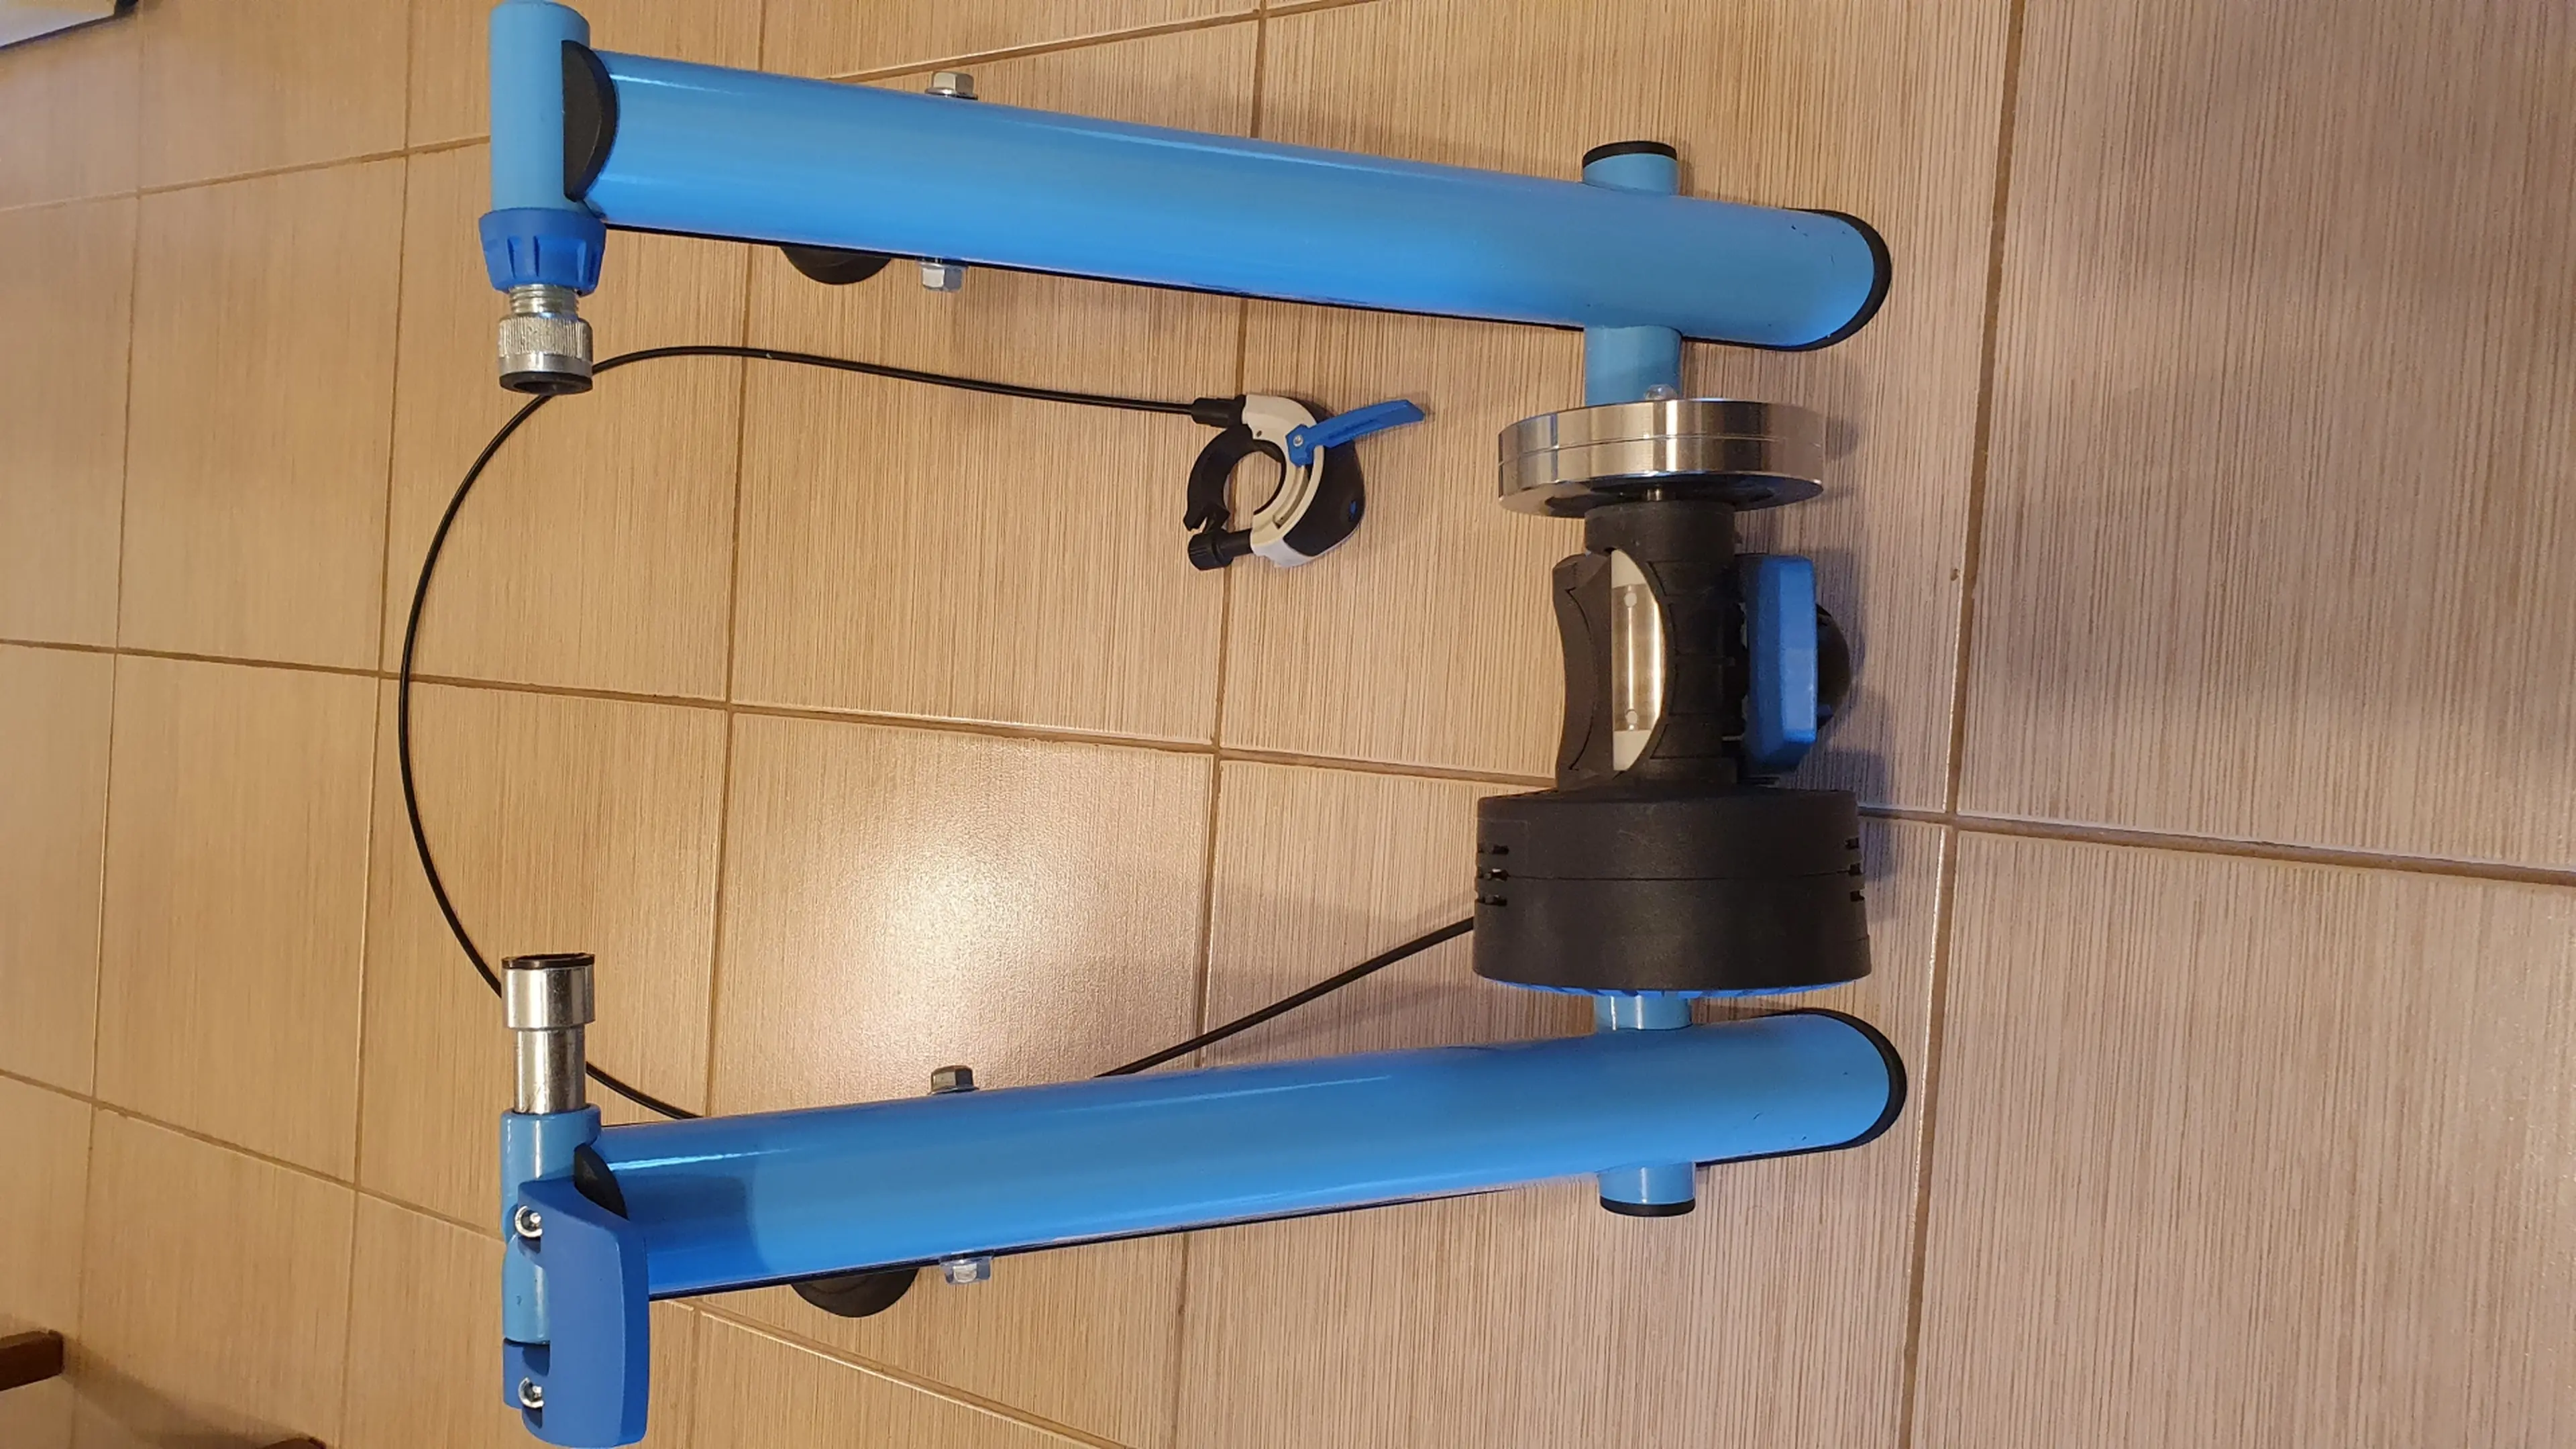 1. Vand trainer Tacx Blue Matic T2650